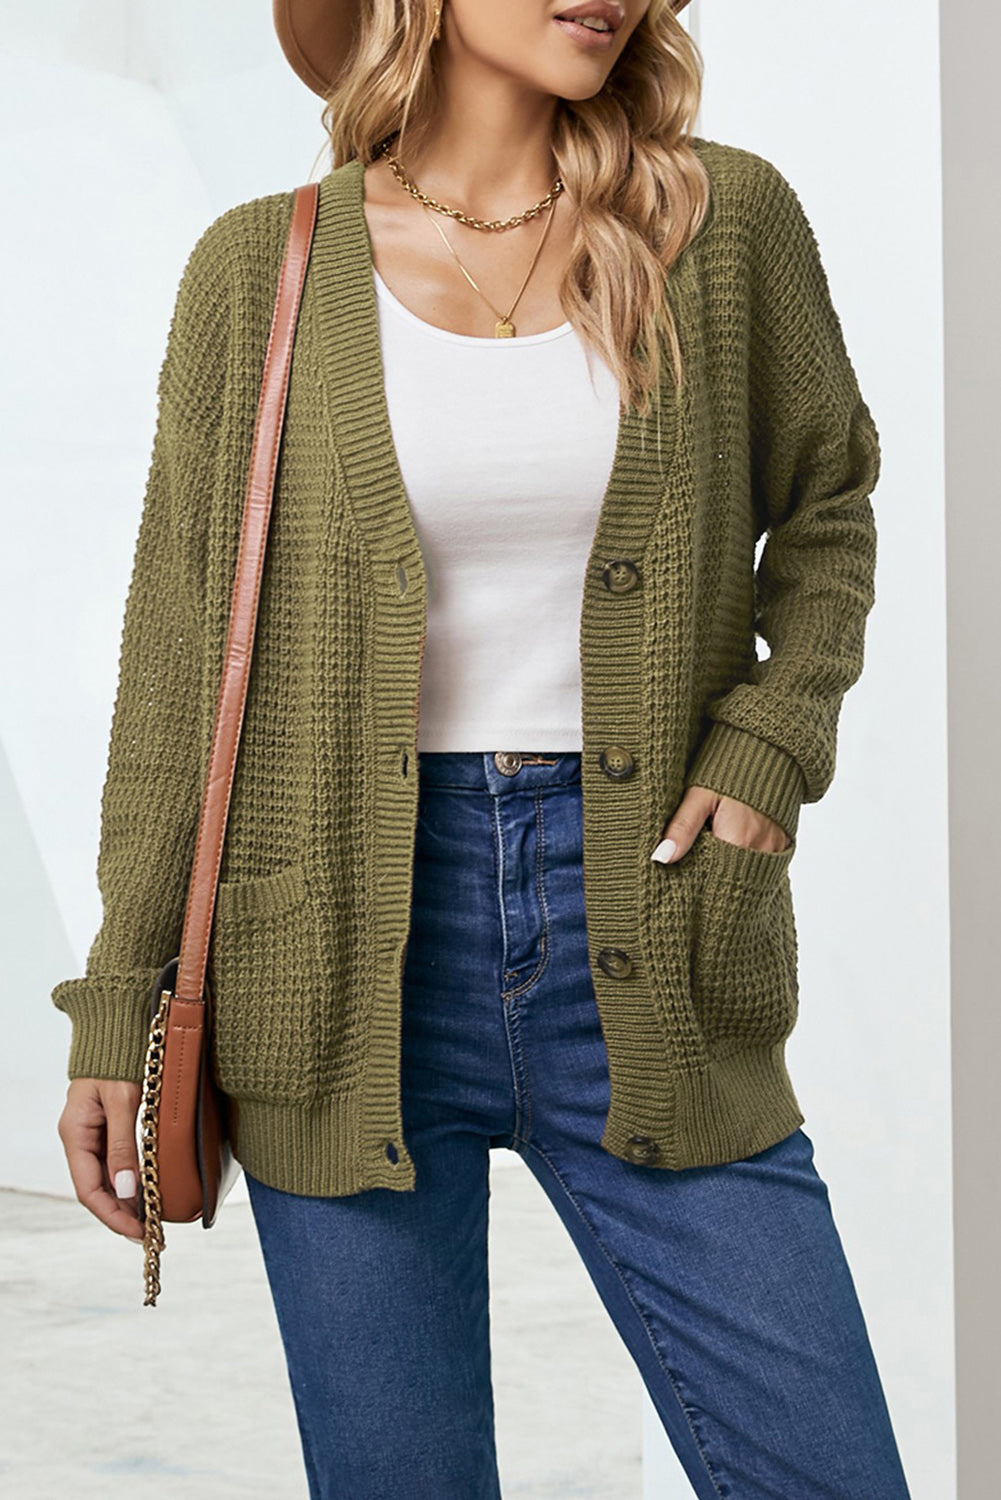 Cozy Chic Button Down Cardigan - Green / S - Women’s Clothing & Accessories - Shirts & Tops - 5 - 2024